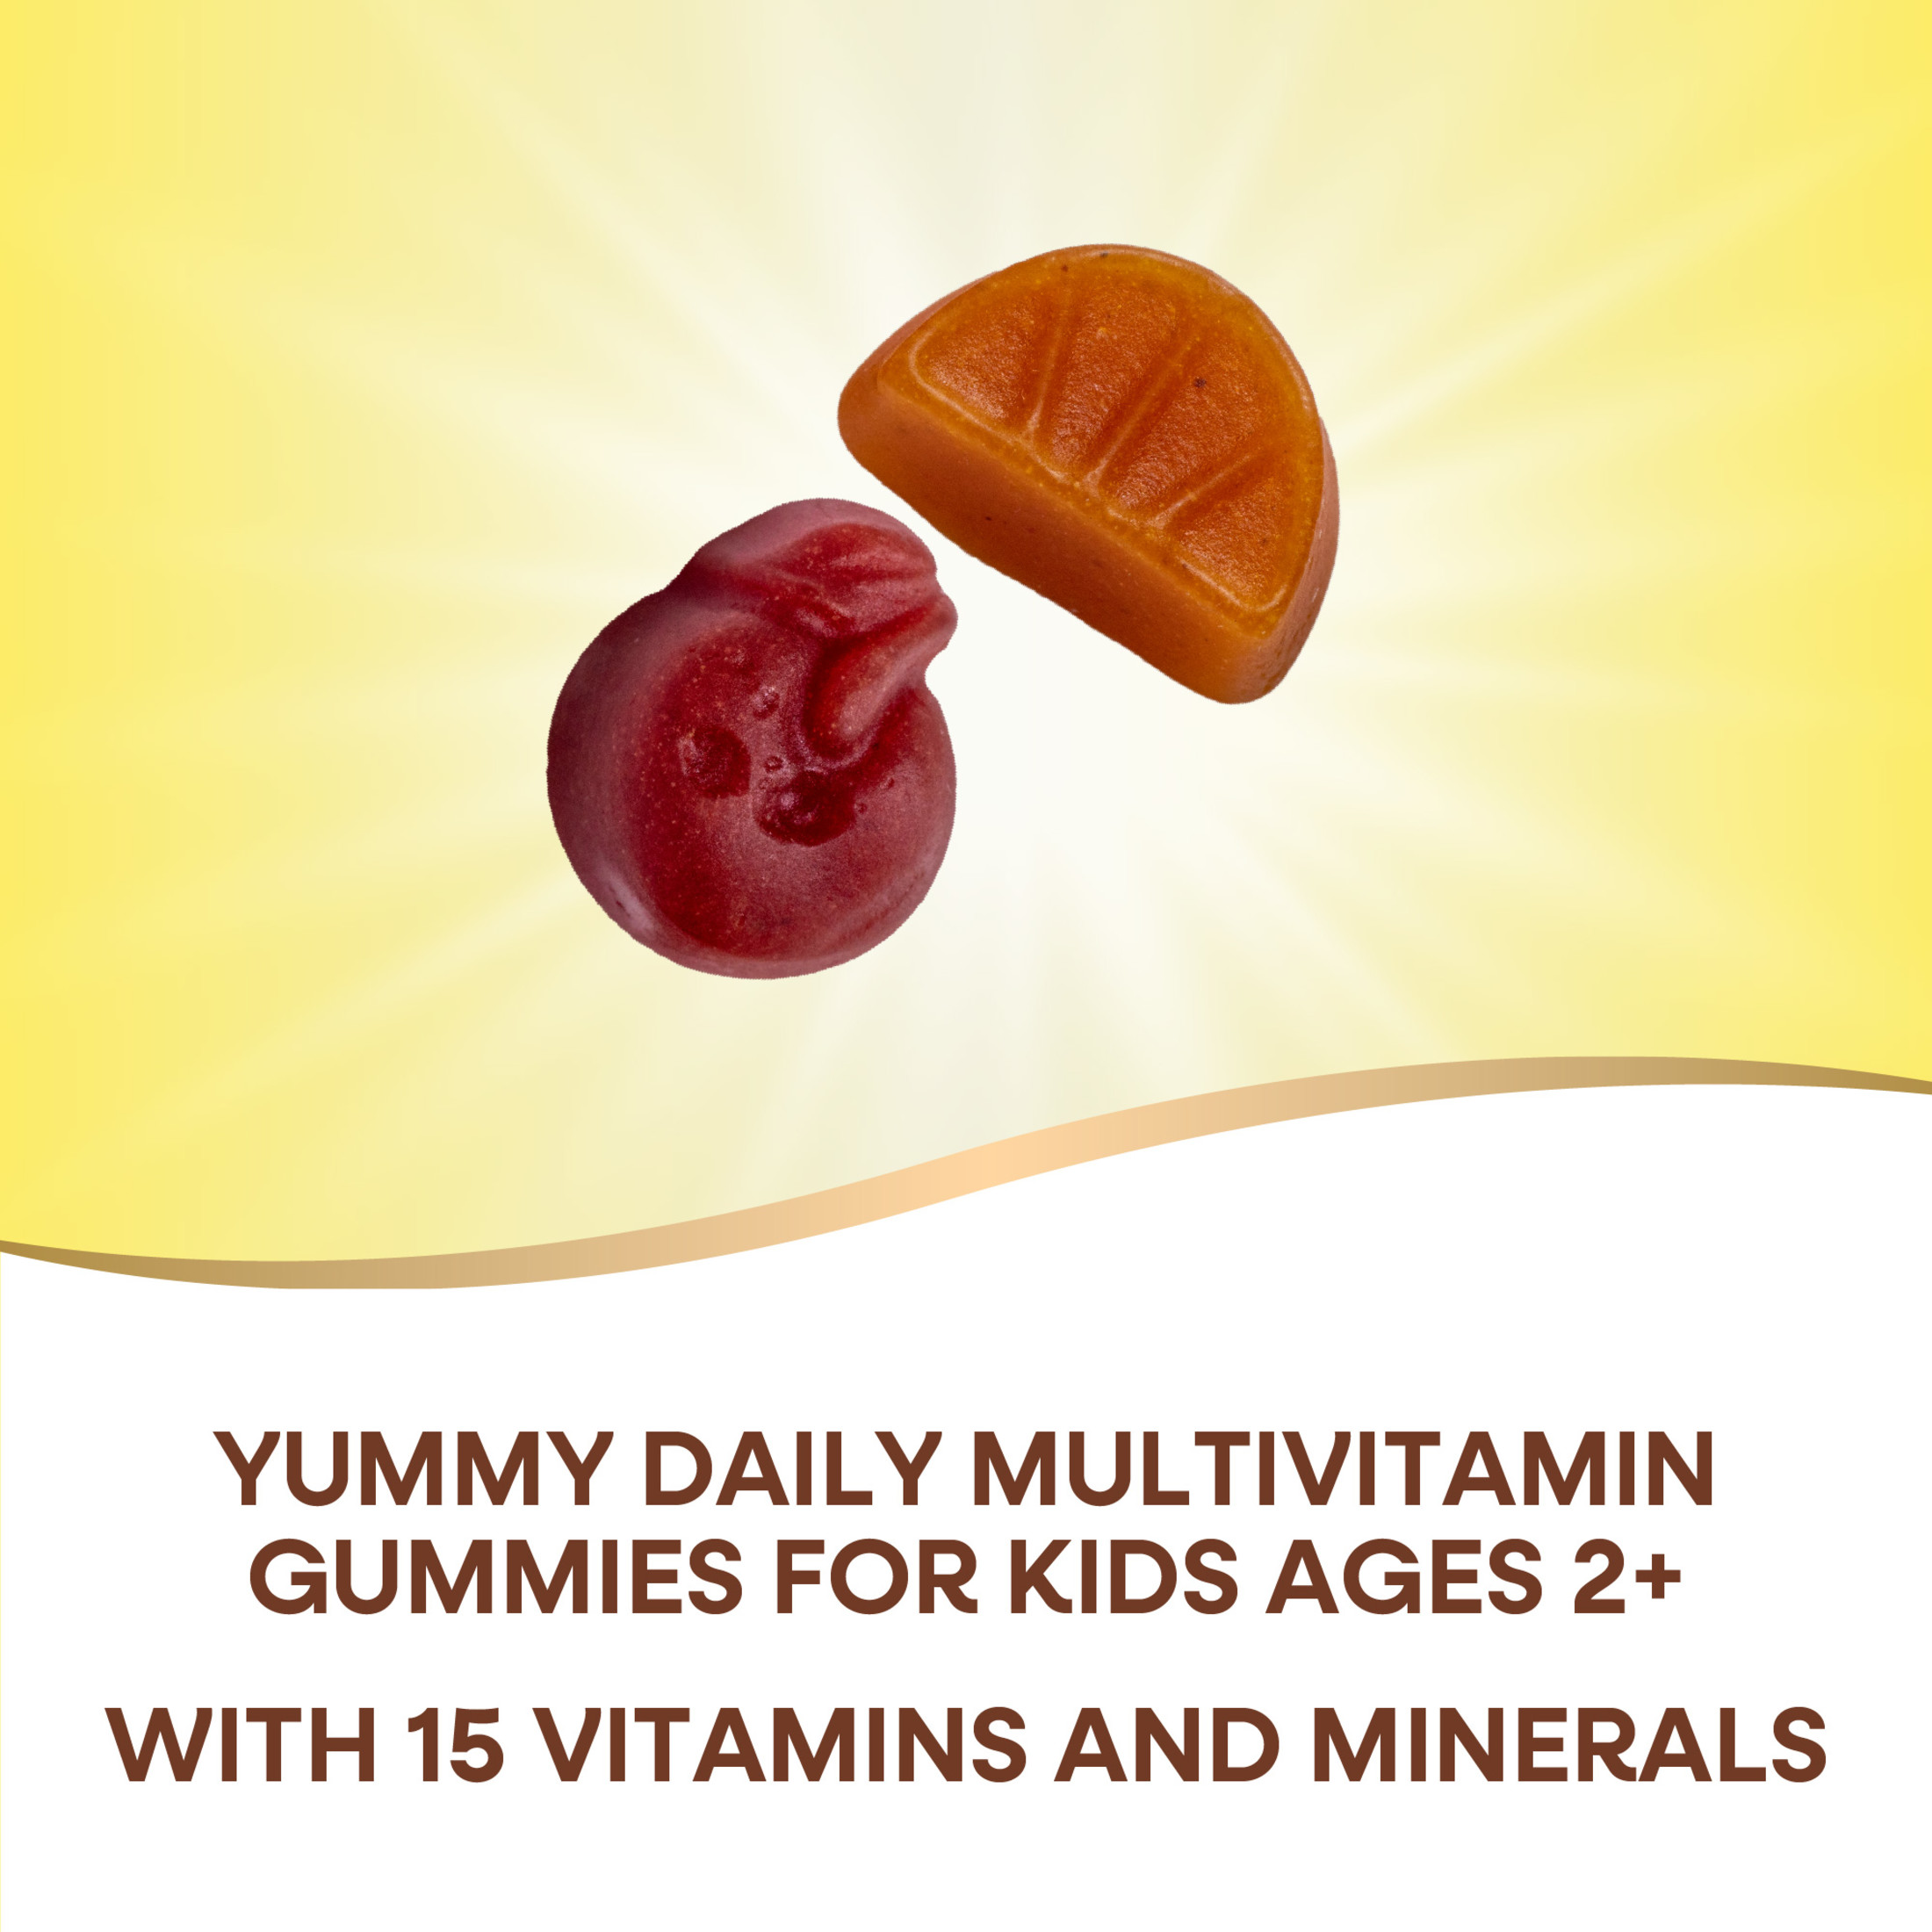 Alive! Kid's Daily Multivitamin Gummies, Supports Growth and Development*, Fruit Flavored, 60 Count - image 4 of 8